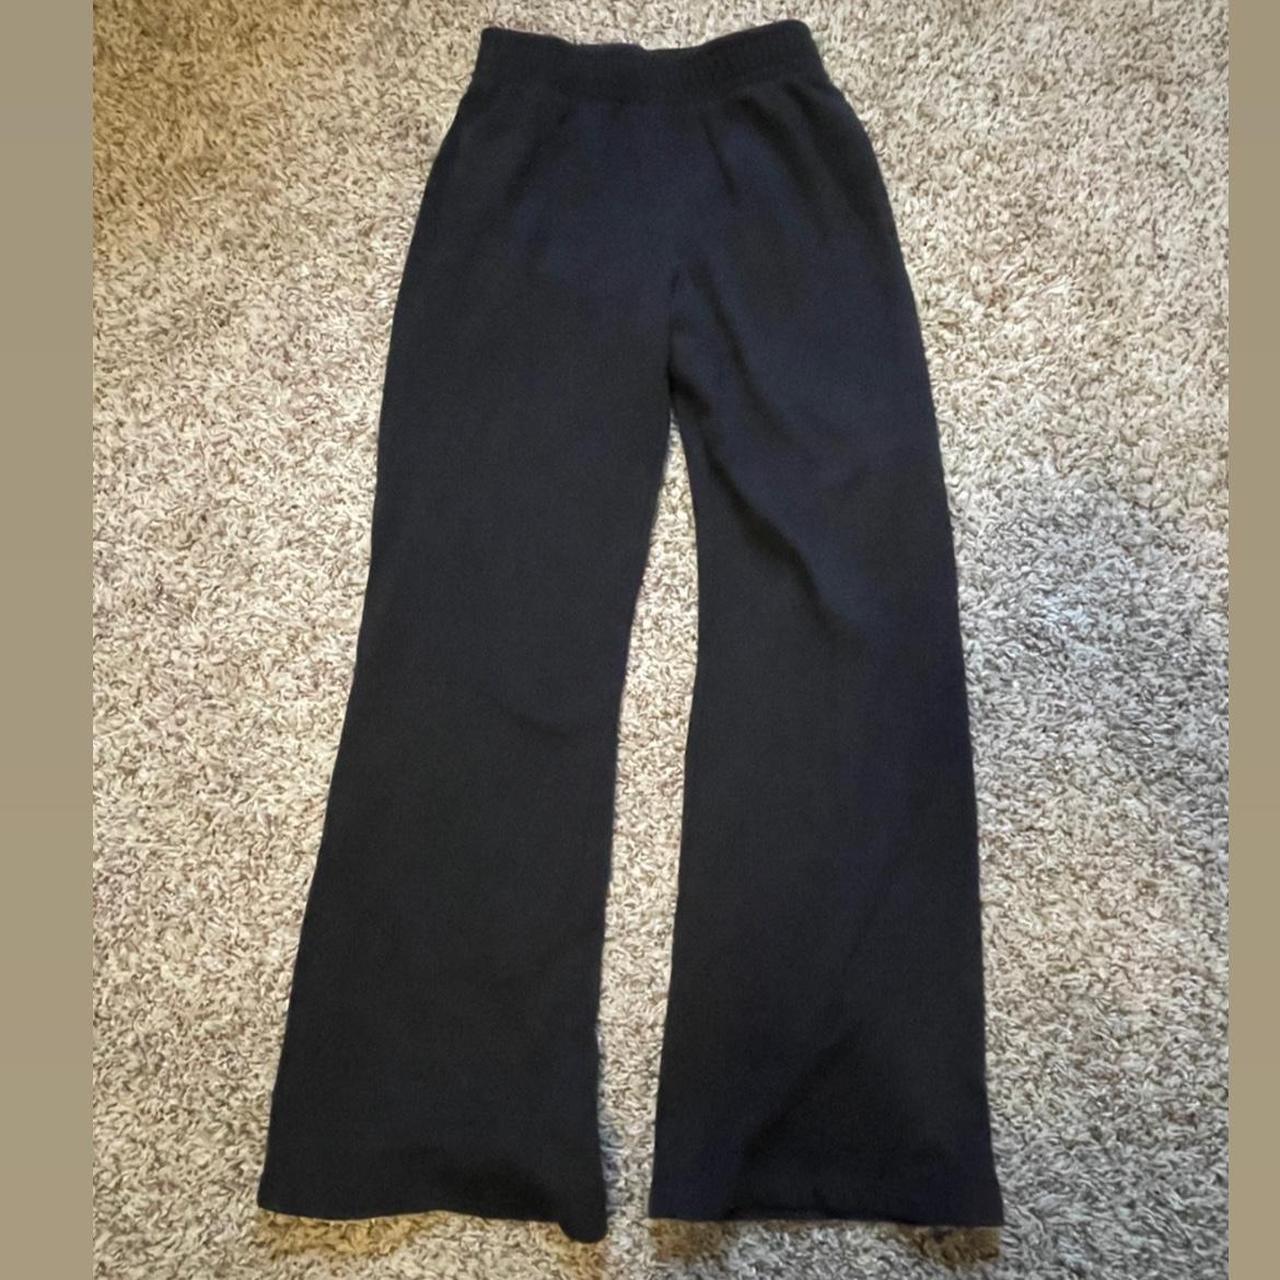 Black wild fable French terry flare sweatpants. Size... - Depop